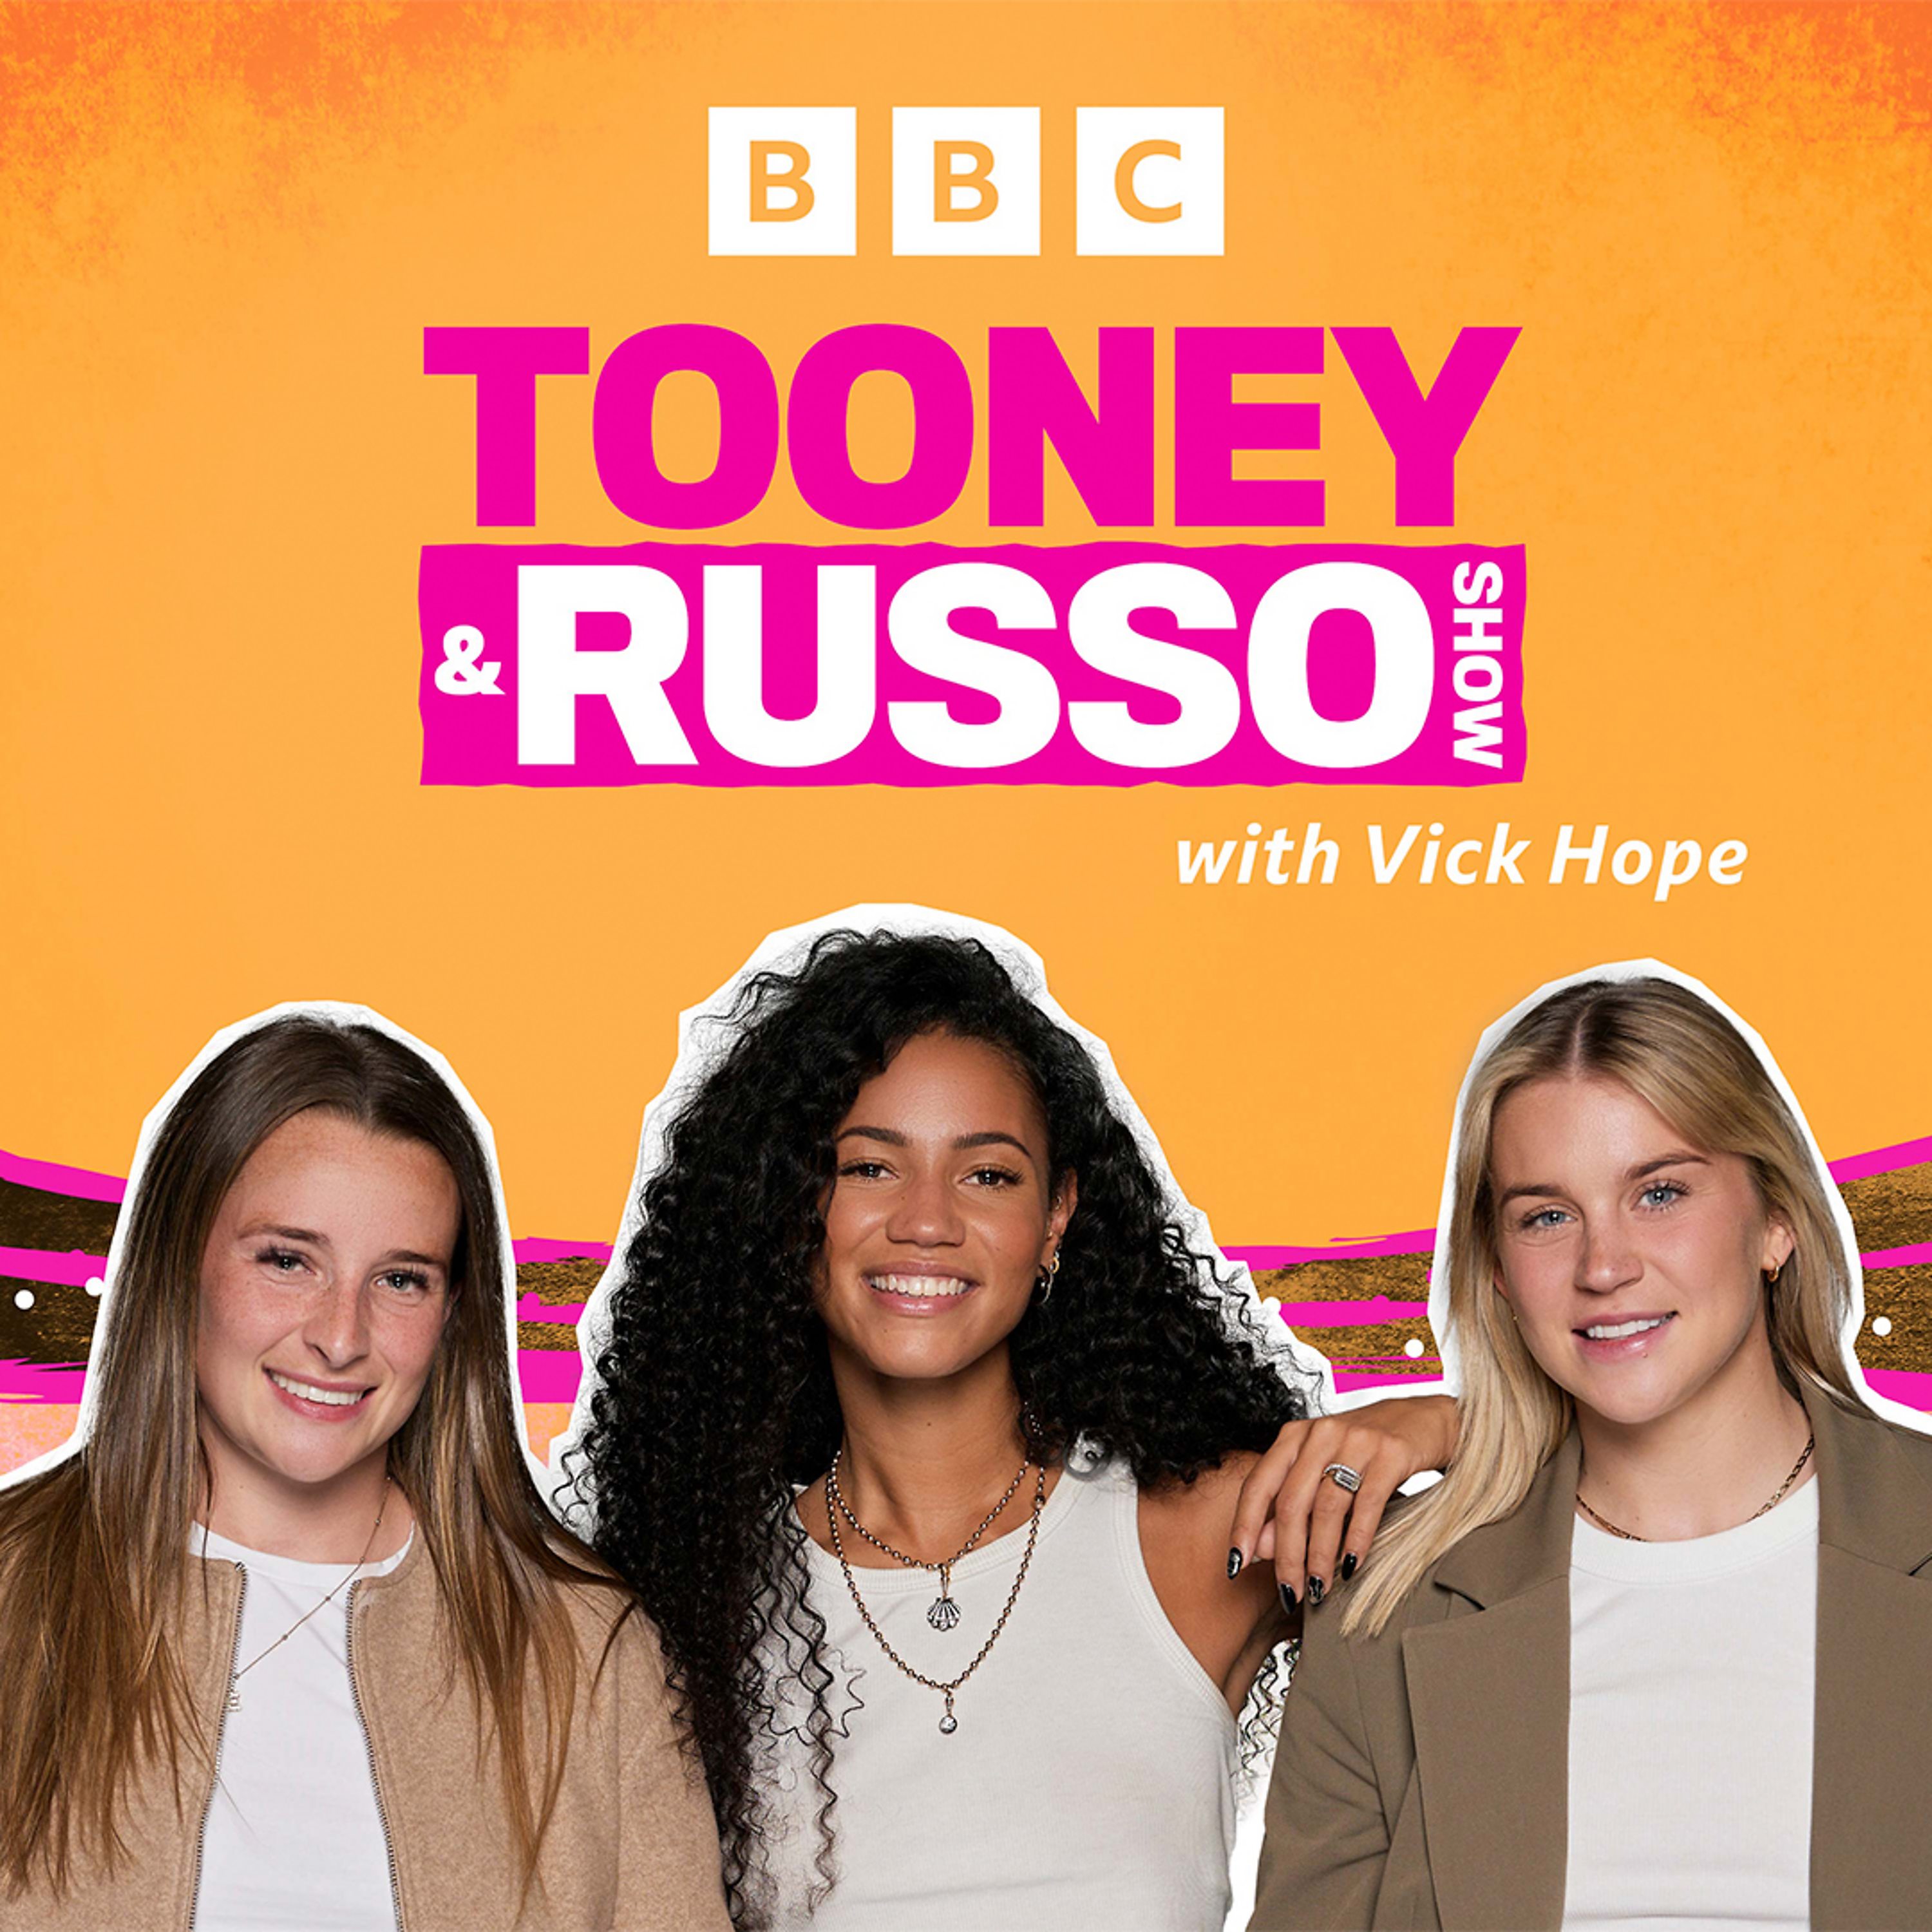 Introducing... The Tooney & Russo Show